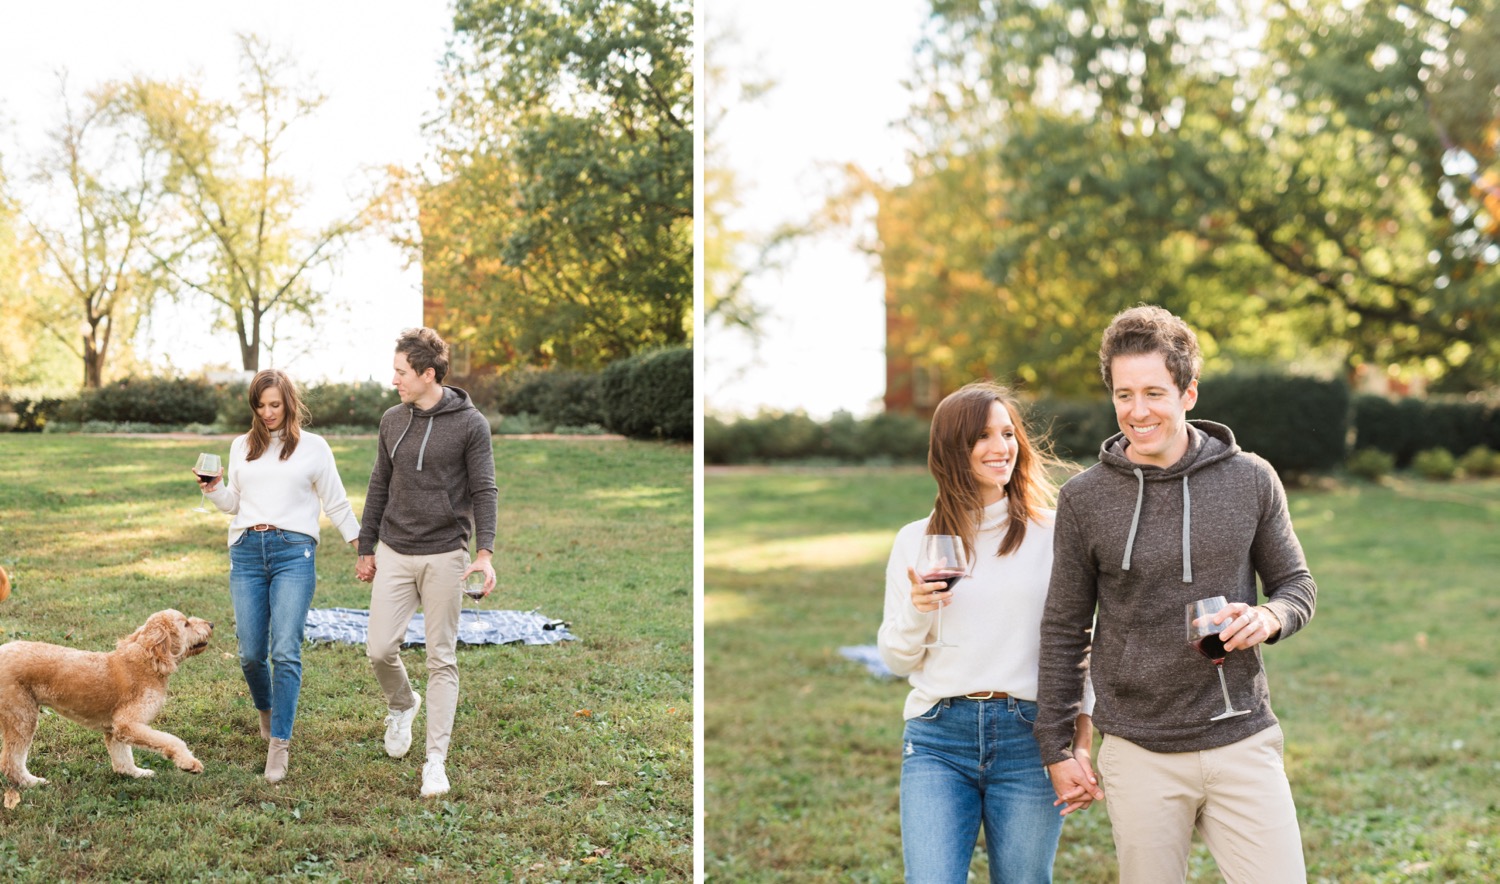 bride and groom to be enjoy a walk during engagement photoshoot in Northern Virginia